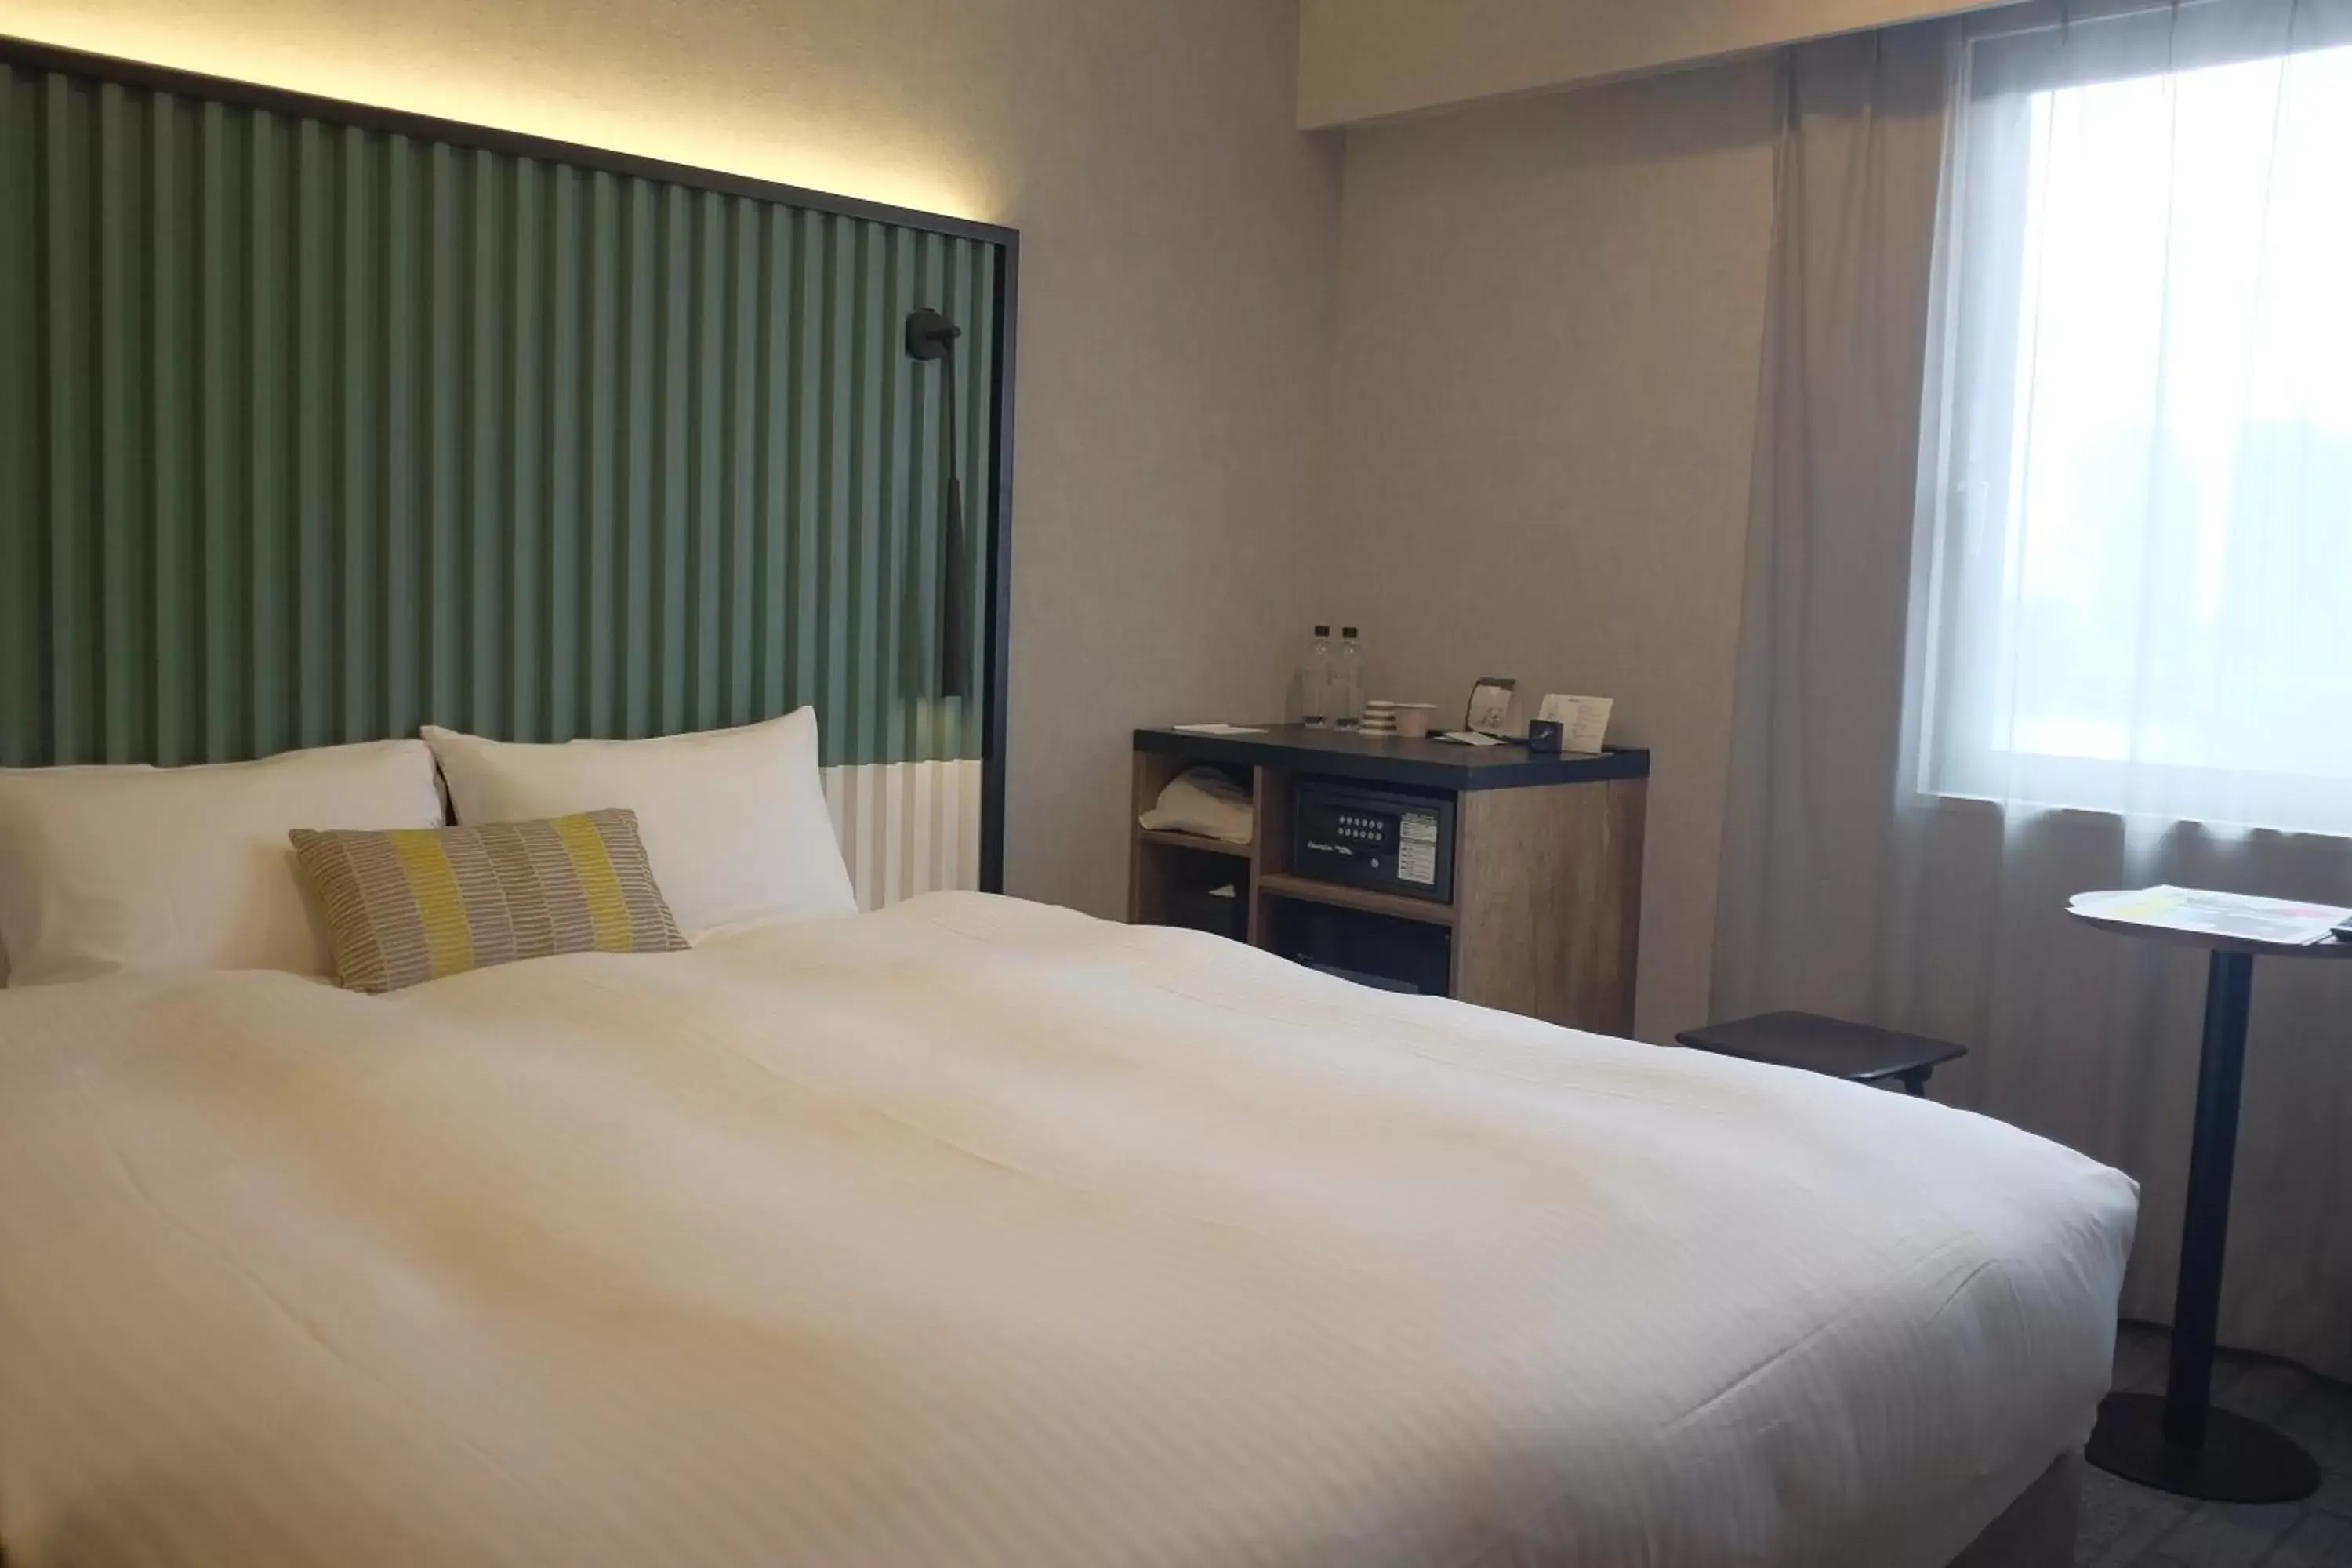 17㎡ Superior Hollywood Room with Park View - Non-Smoking in THE KNOT TOKYO Shinjuku